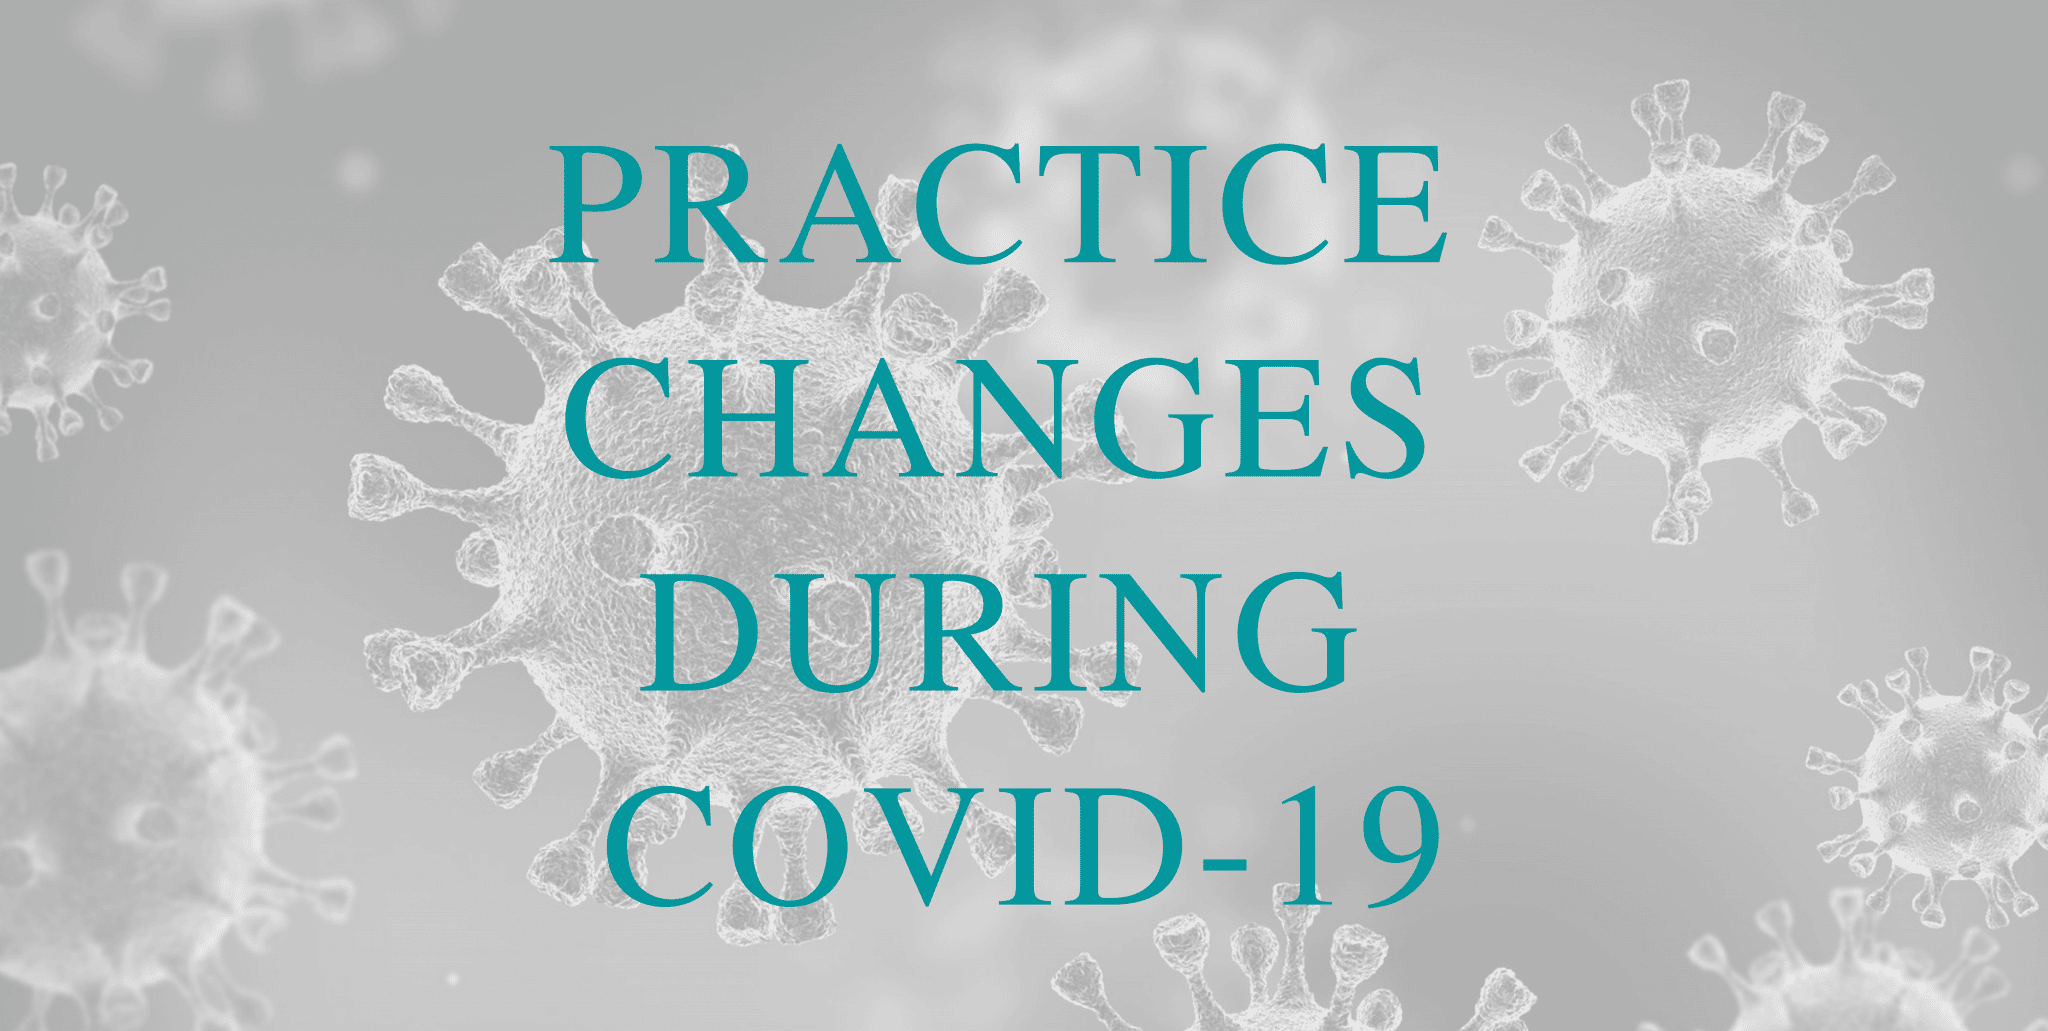 Practice Changes During COVID-19 for NHS Patients Image